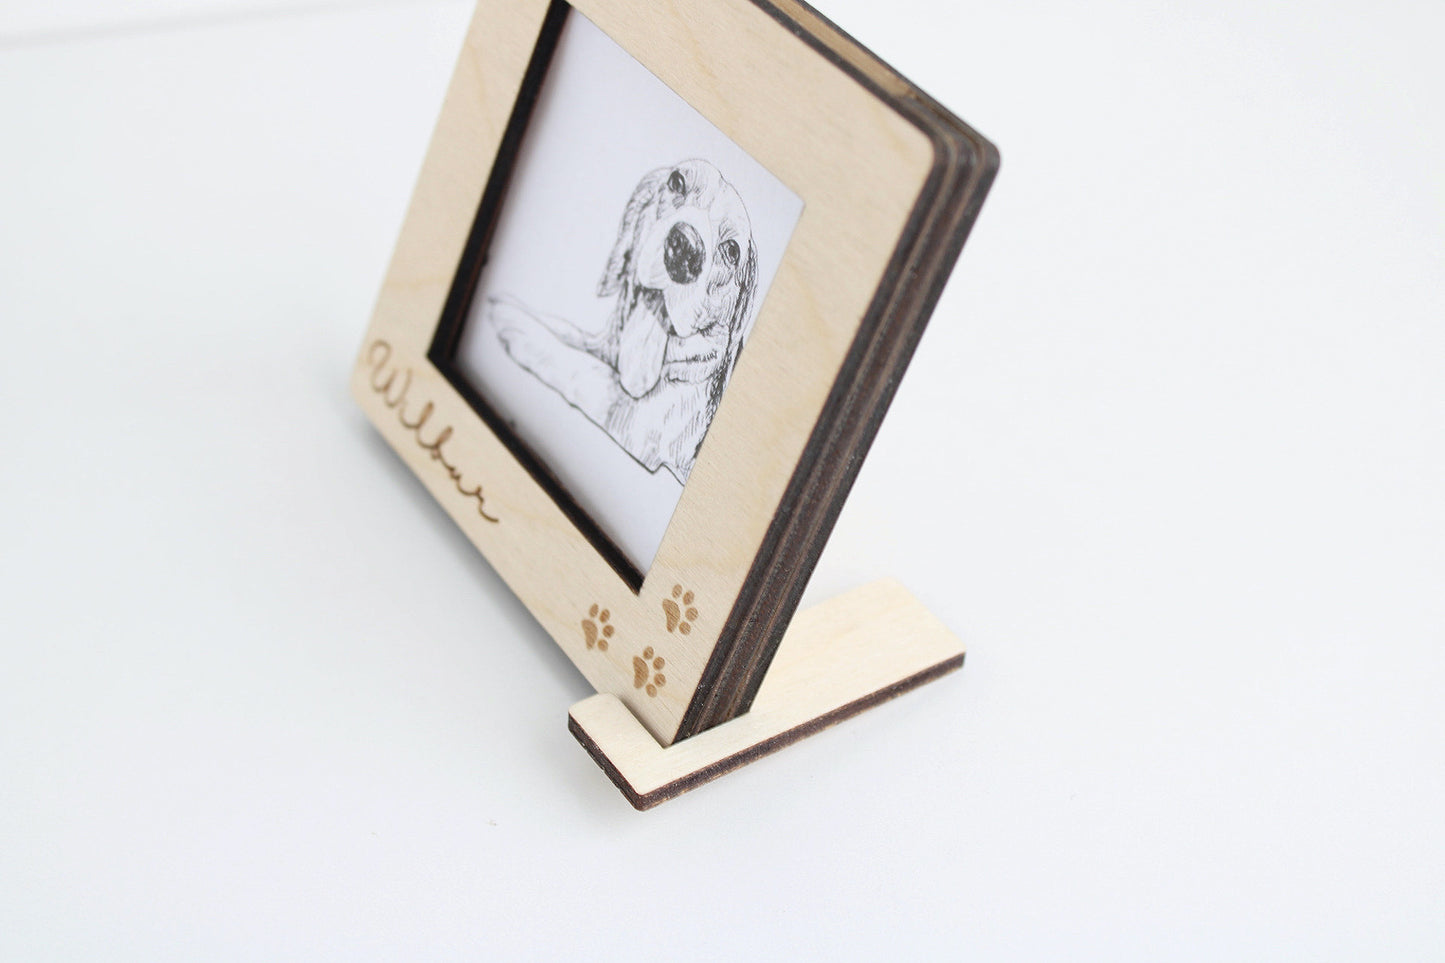 Pet picture frame, dog picture frame, pet memorial picture frame